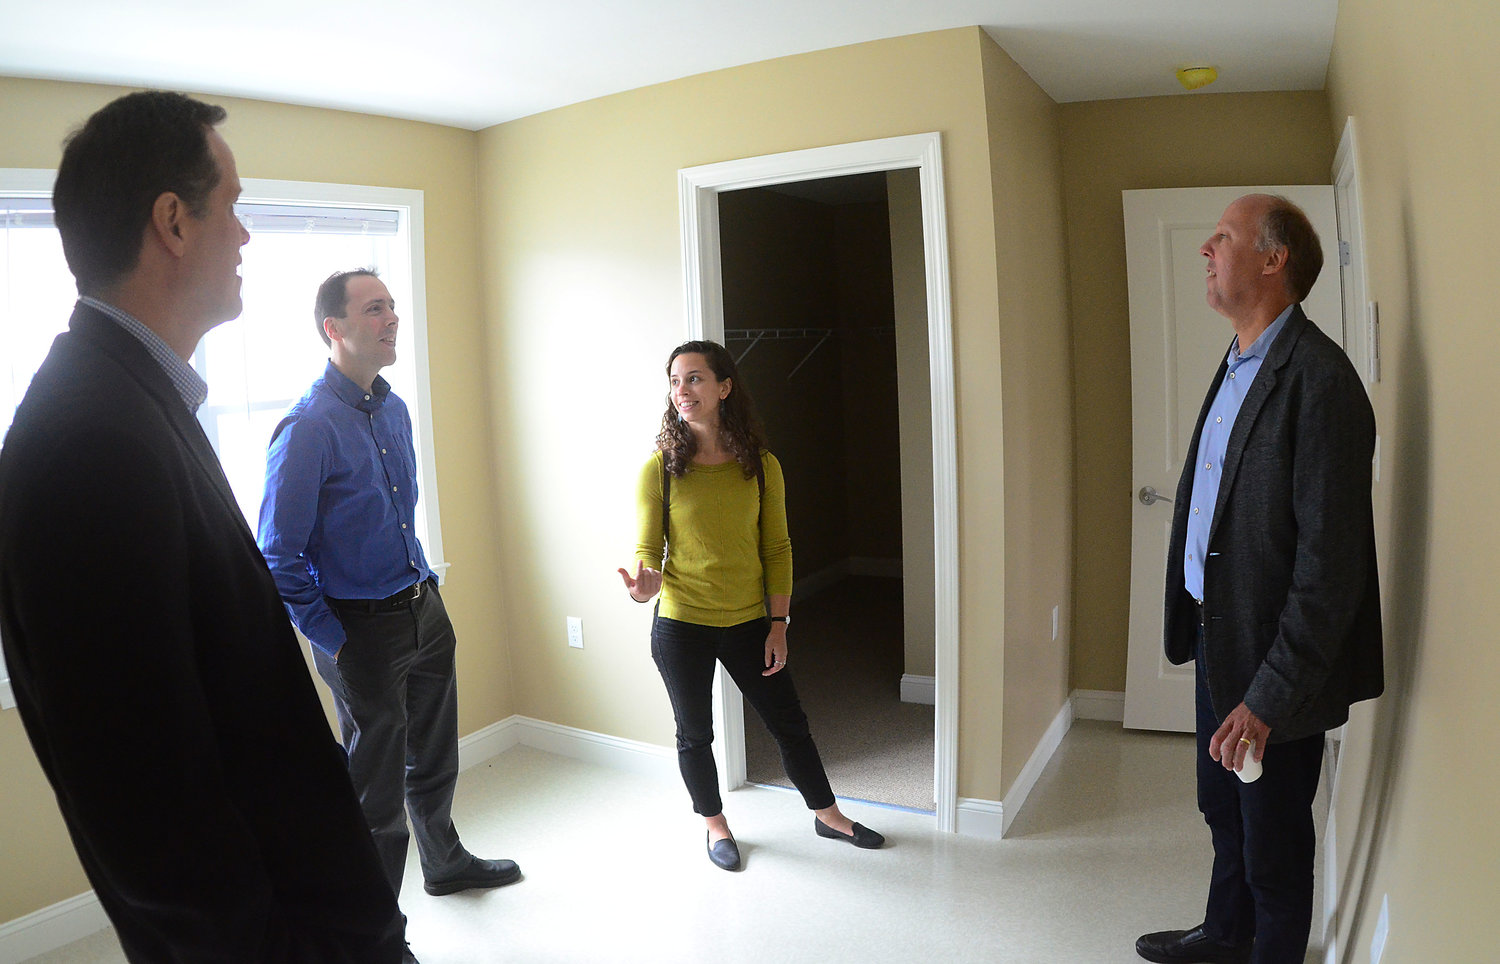 Shawn Martin, Brian Kortz and Christina Viera of Fuss and O'Neill and architect Paul Attemann of Union Studio (from left to right) check out a one bedroom apartment at Palmer Pointe during a special ribbon-cutting event on Friday.